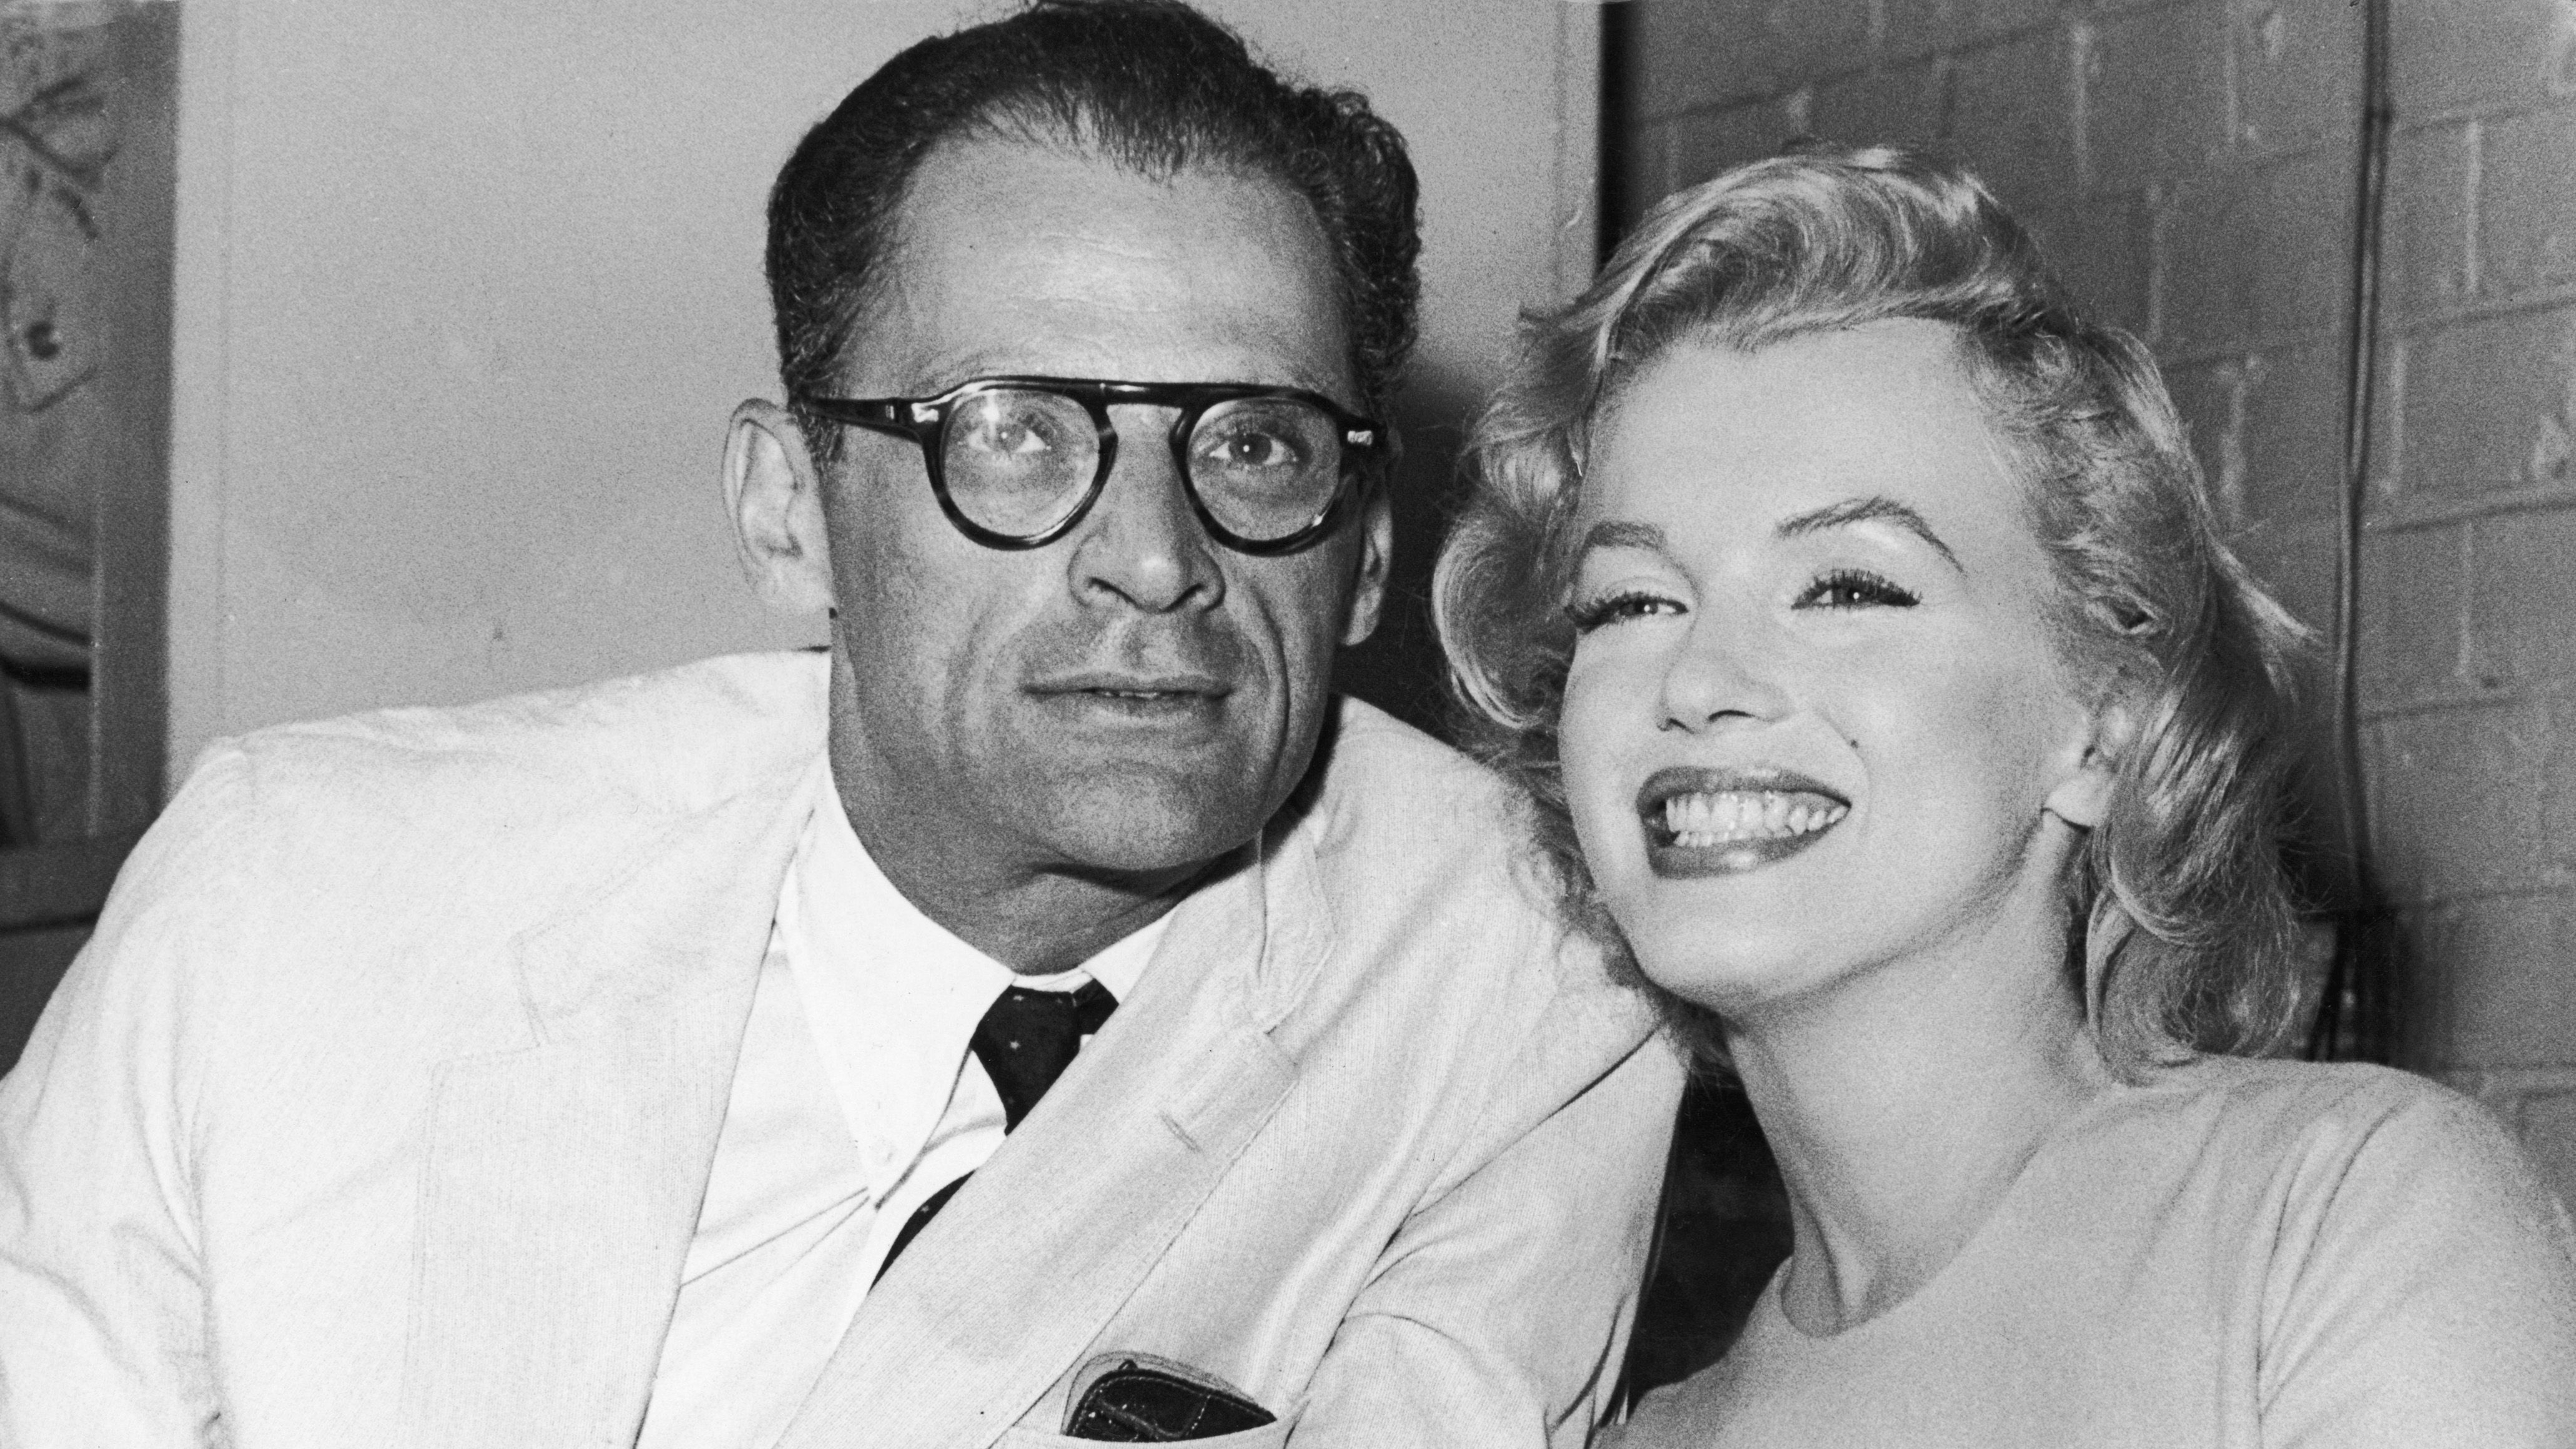 Blonde': The True Story Of Marilyn Monroe's Marriage To Arthur